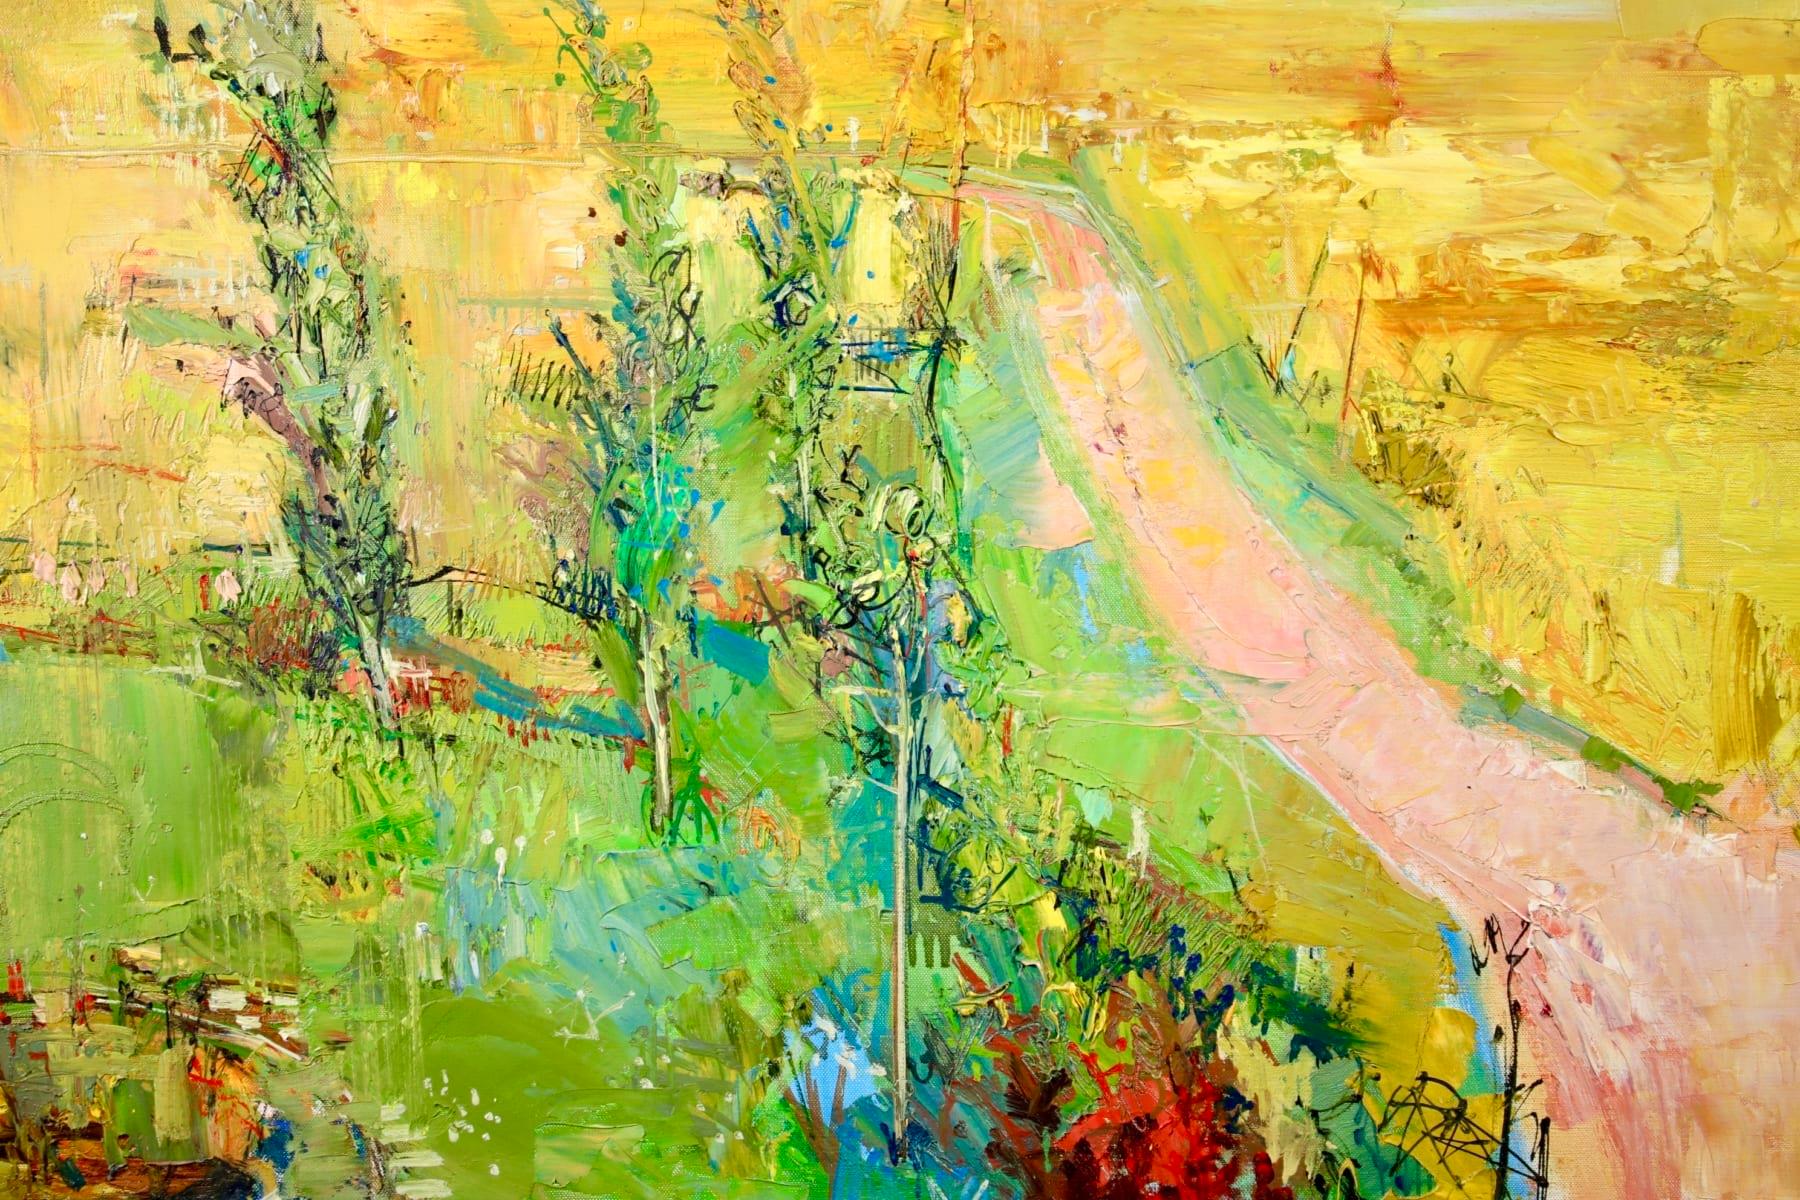 Paysage - Post Impressionist Oil, Summer Landscape by Jean Yves Commere - Beige Landscape Painting by Jean Yves Commère